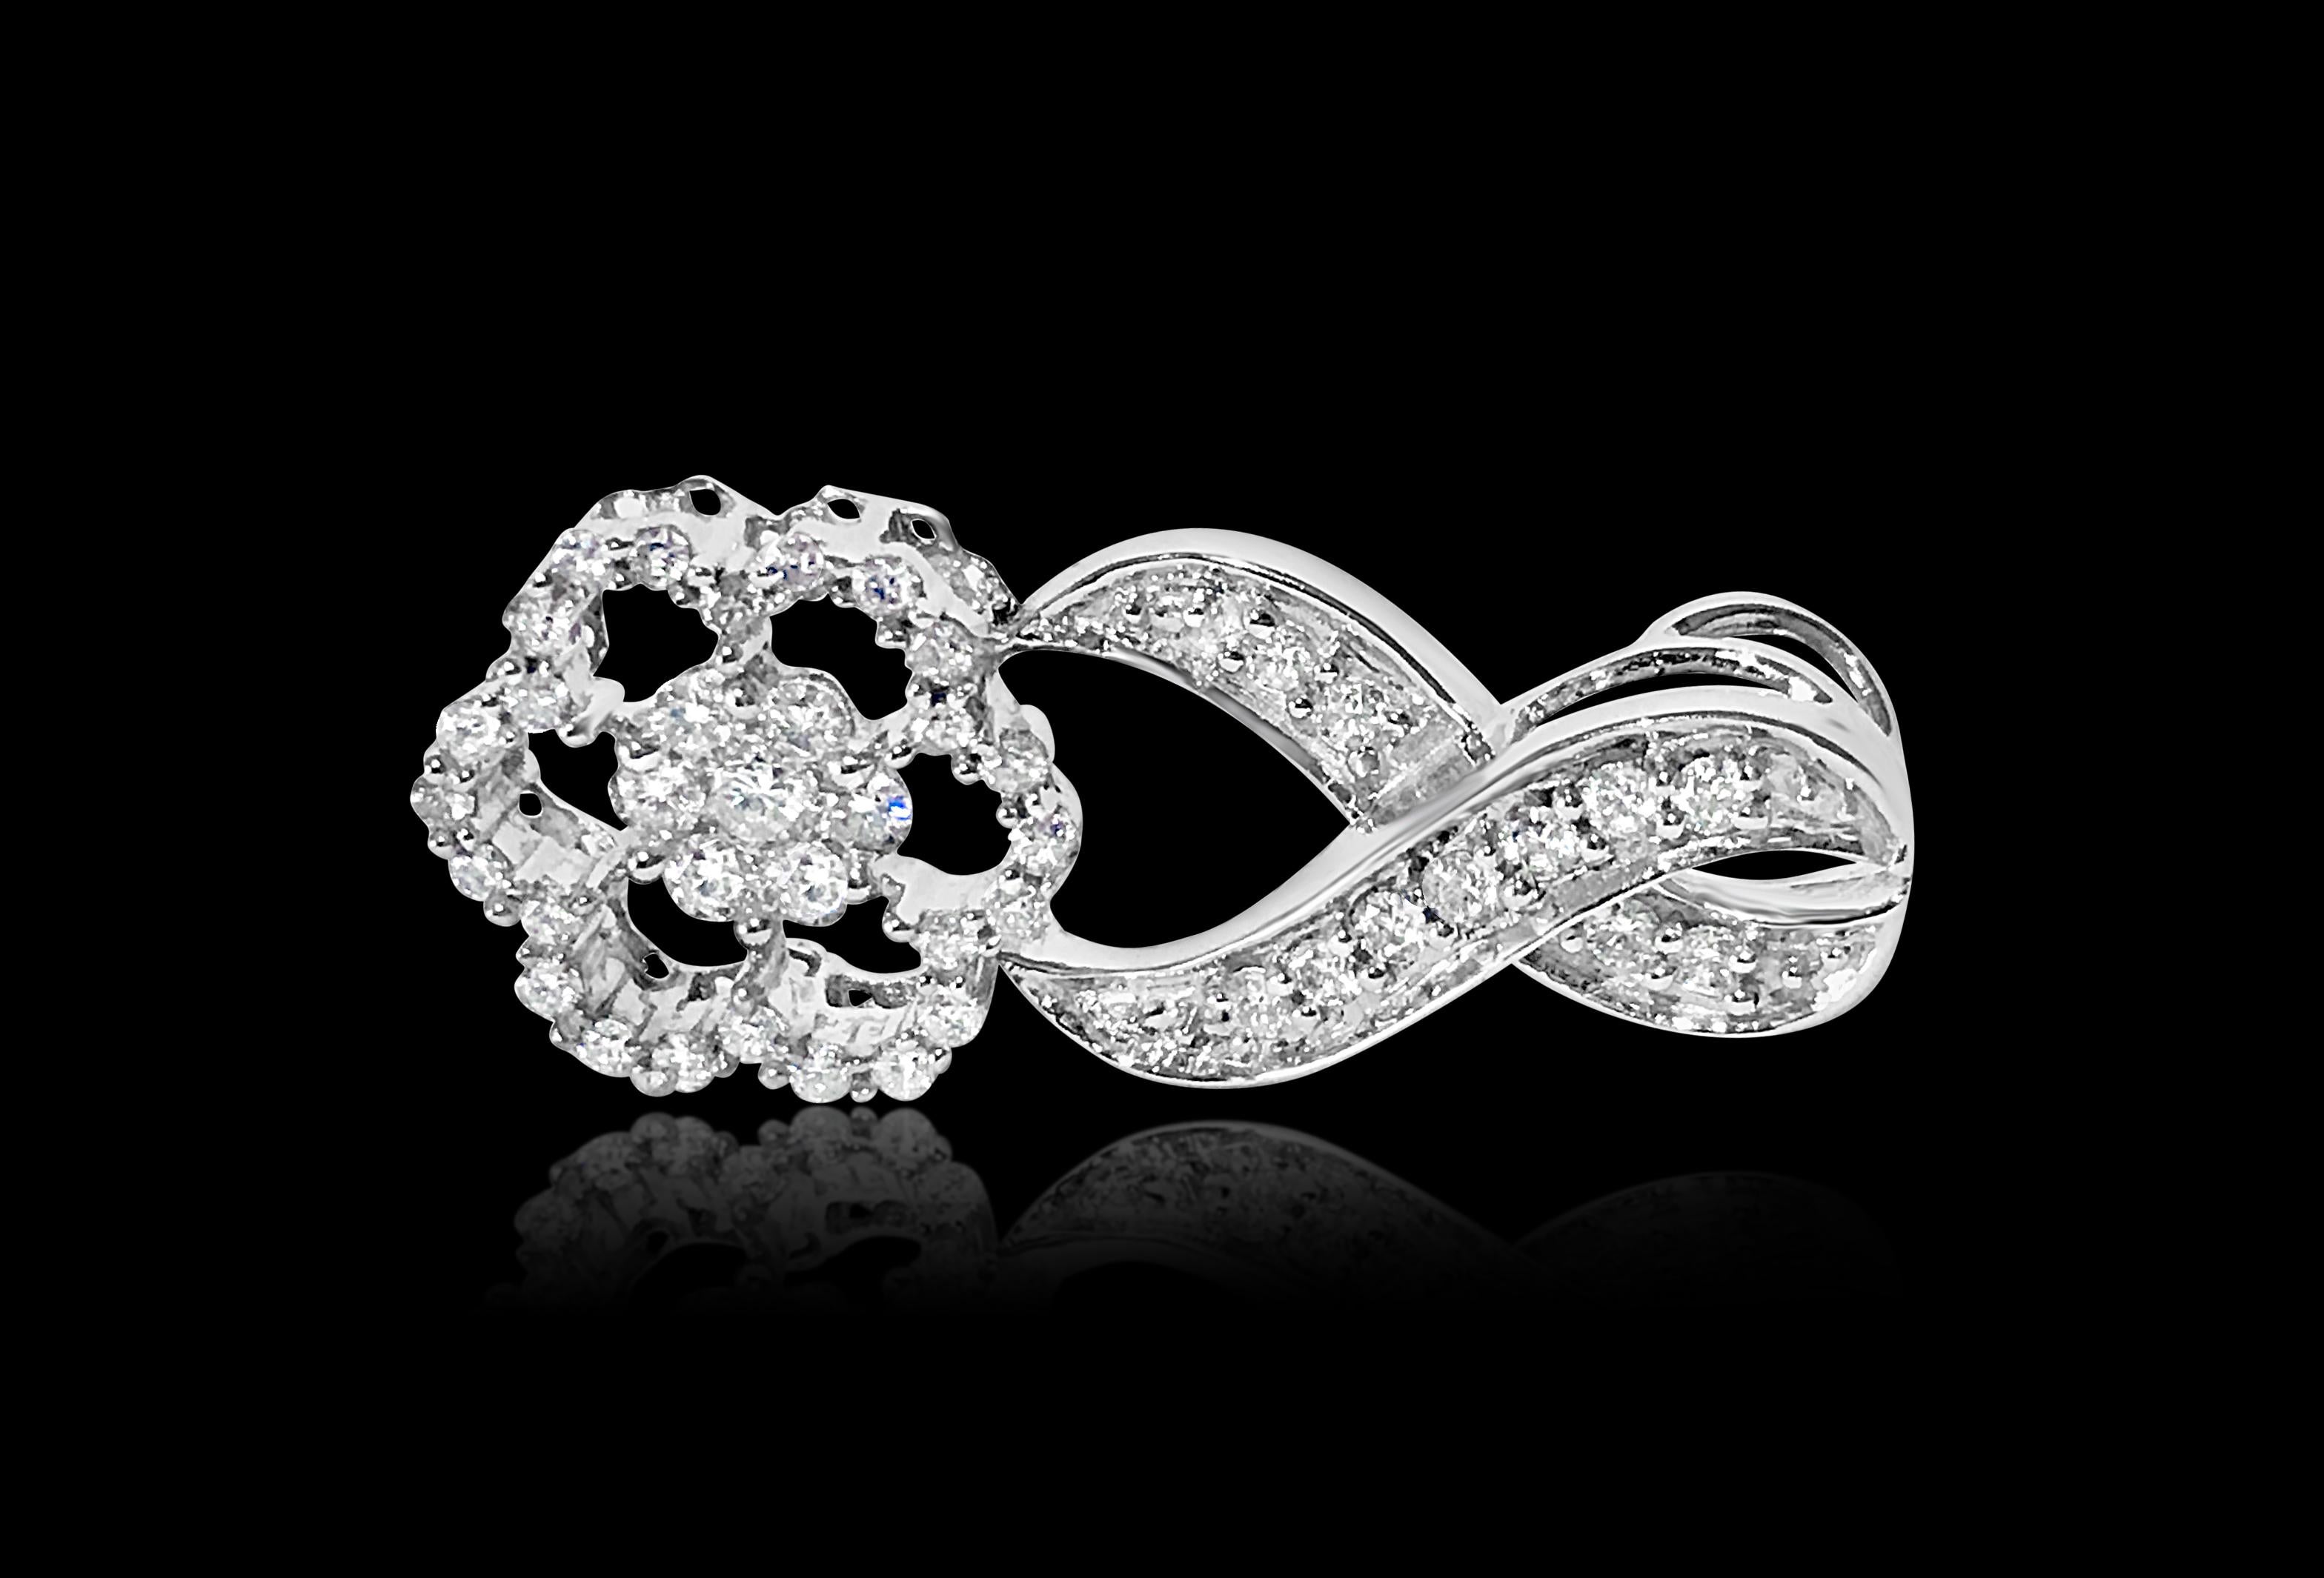 Metal: 14K white gold. 
1.25 carat diamonds. VS-SI clarity and G color. Round brilliant cut diamonds. Clean diamonds and excellent luster. Beautiful infinity design. Modern designer pendant. 
Chain not included with this piece. 
